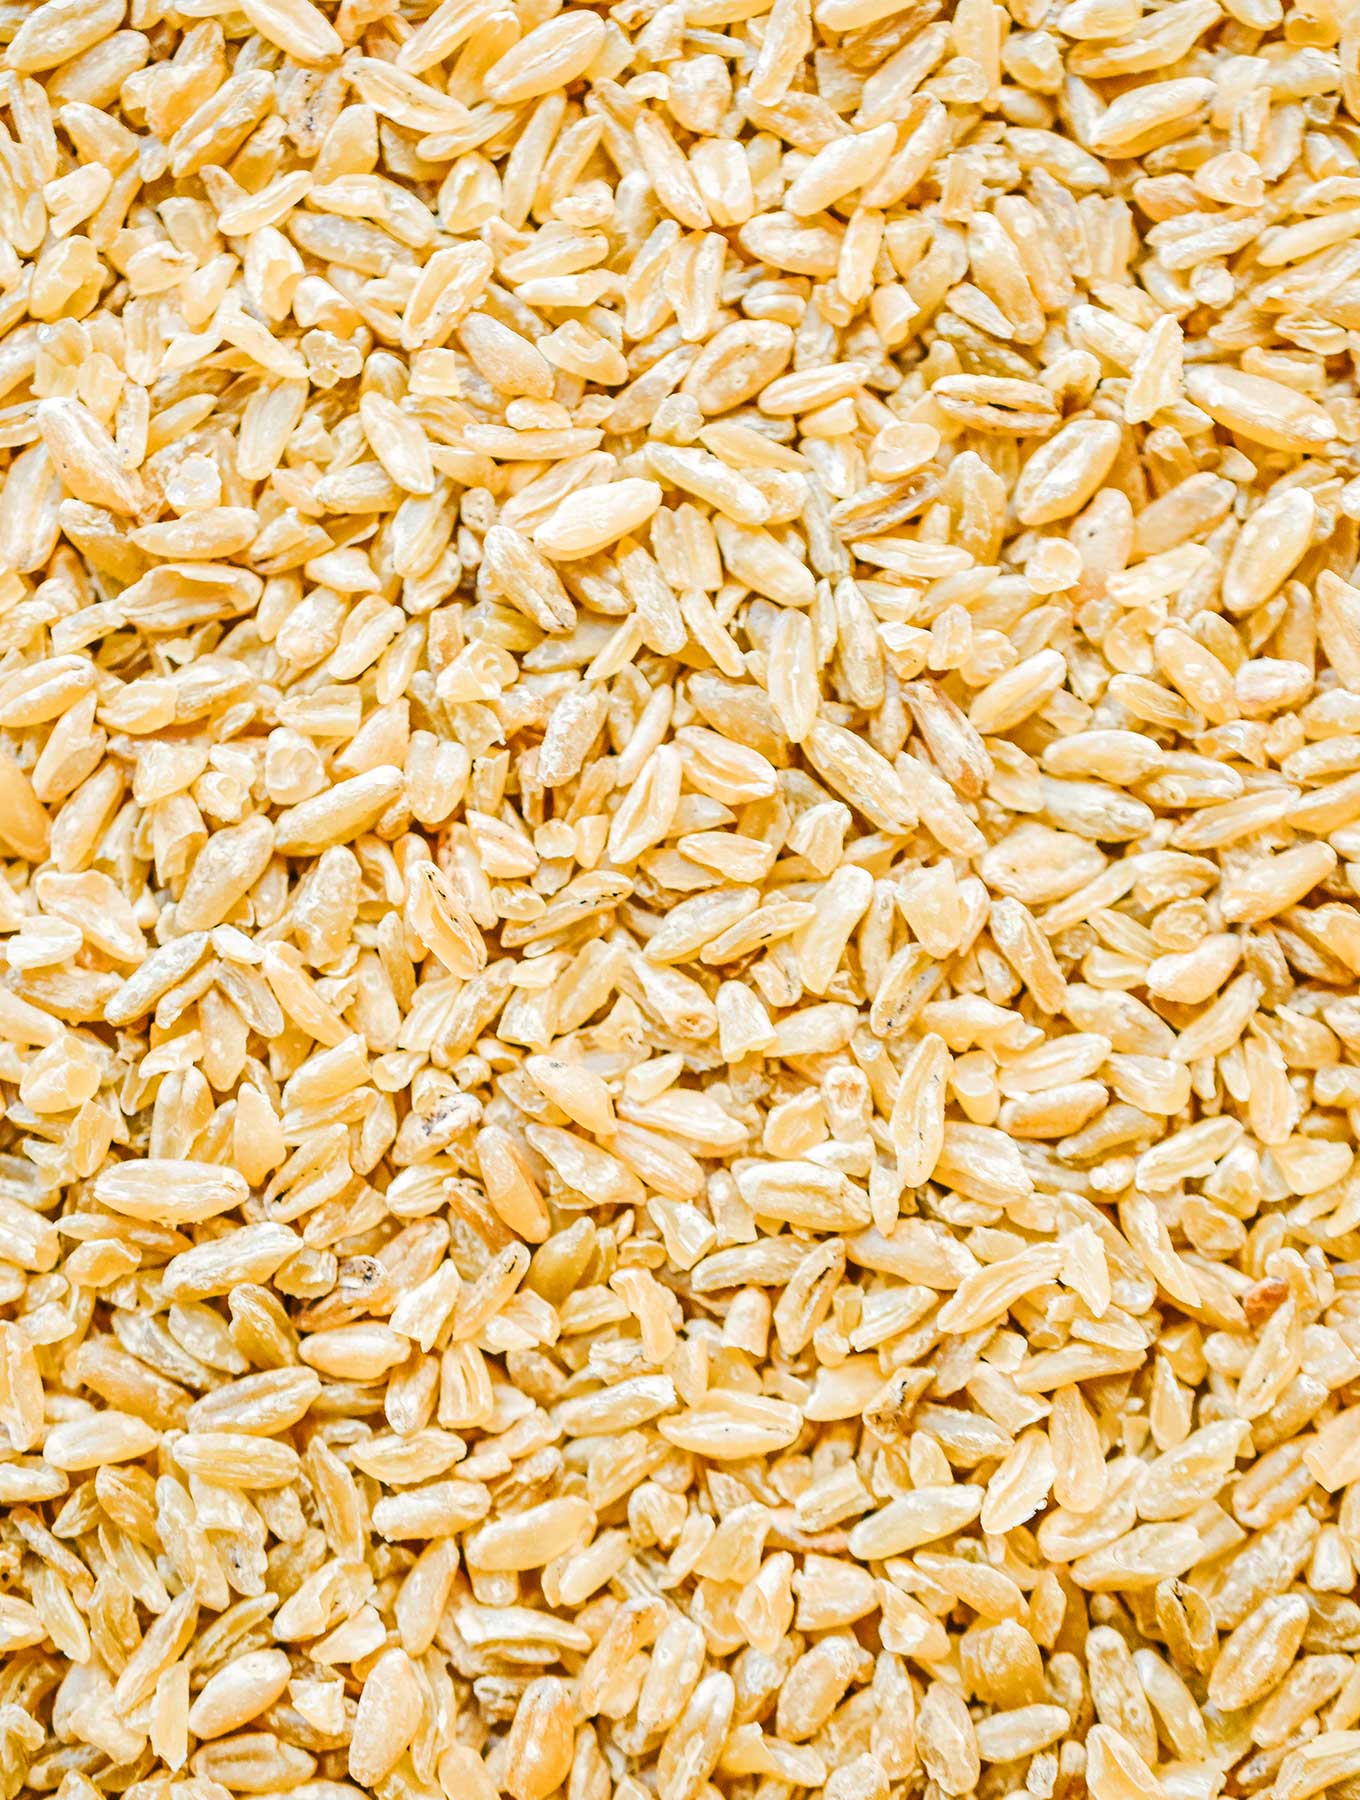 A close-up photo of uncooked freekeh that displays the grains' texture